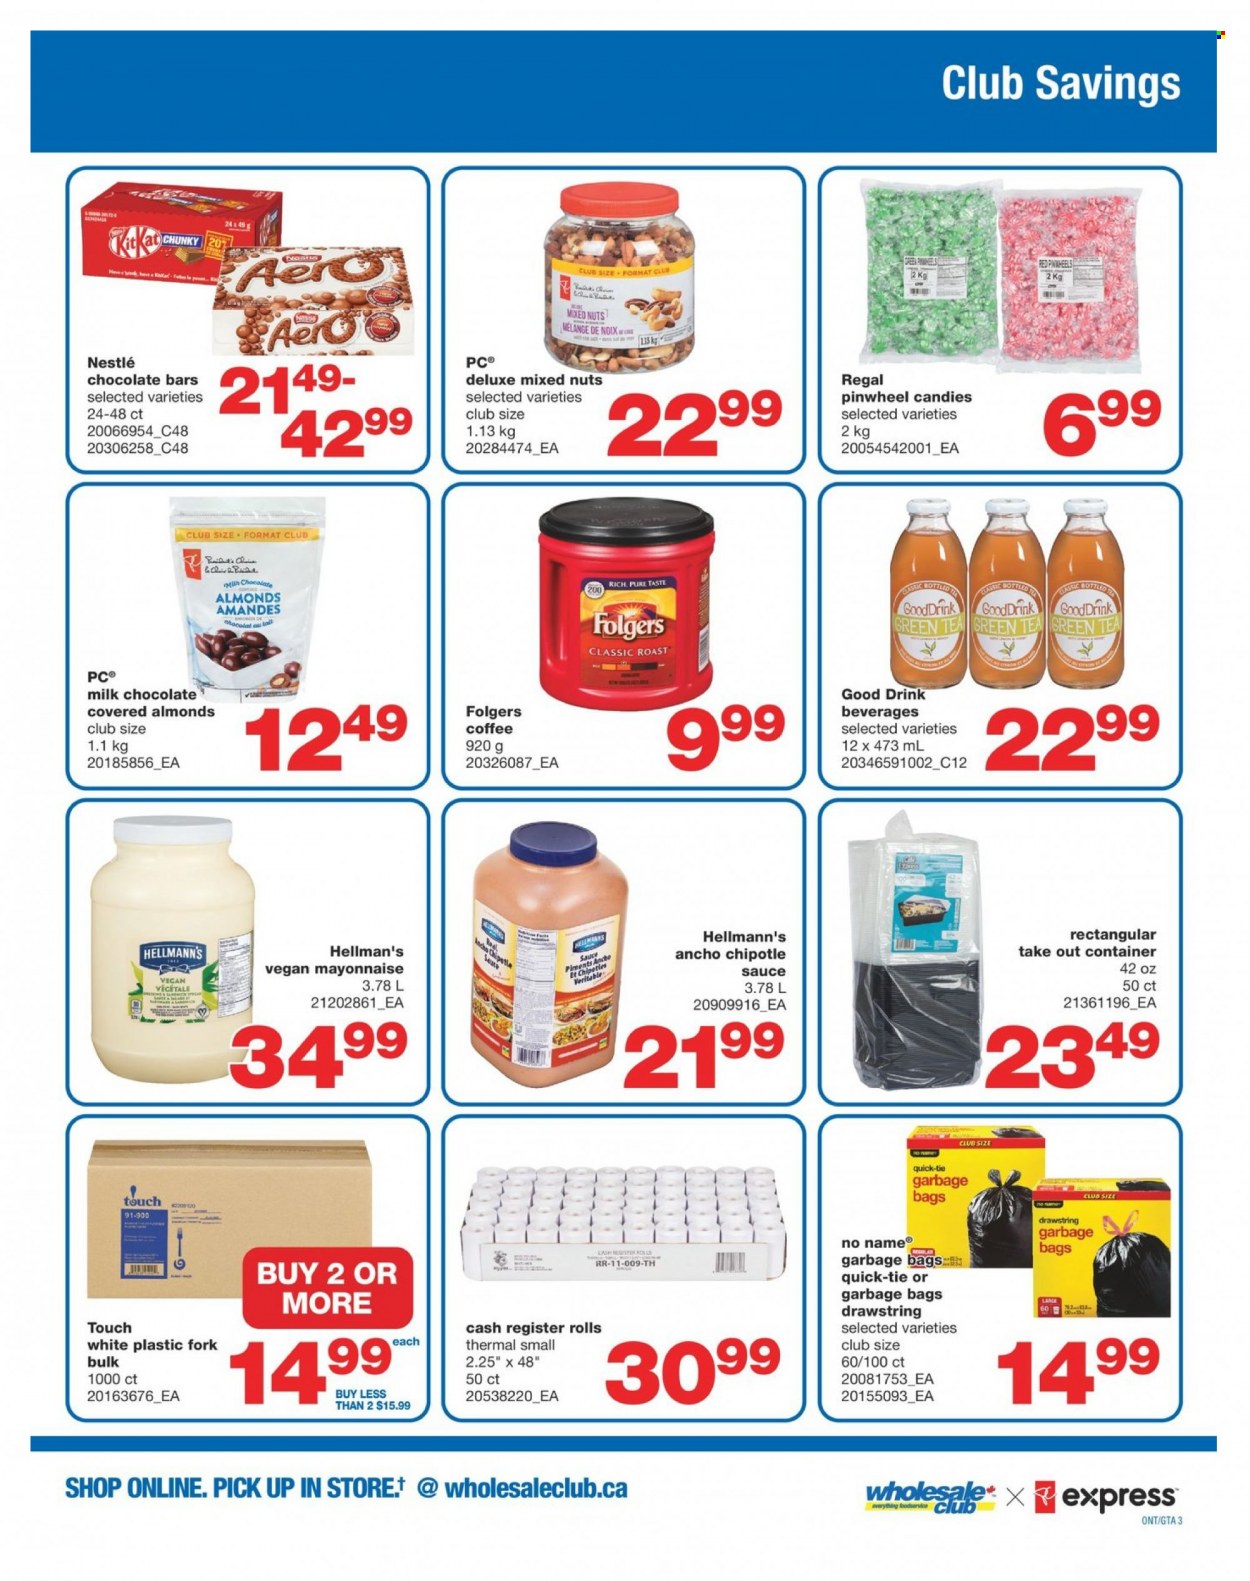 thumbnail - Wholesale Club Flyer - June 09, 2022 - July 06, 2022 - Sales products - No Name, sauce, Président, mayonnaise, Hellmann’s, milk chocolate, KitKat, chocolate bar, mixed nuts, green tea, tea, coffee, Folgers, fork, container, Nestlé. Page 3.